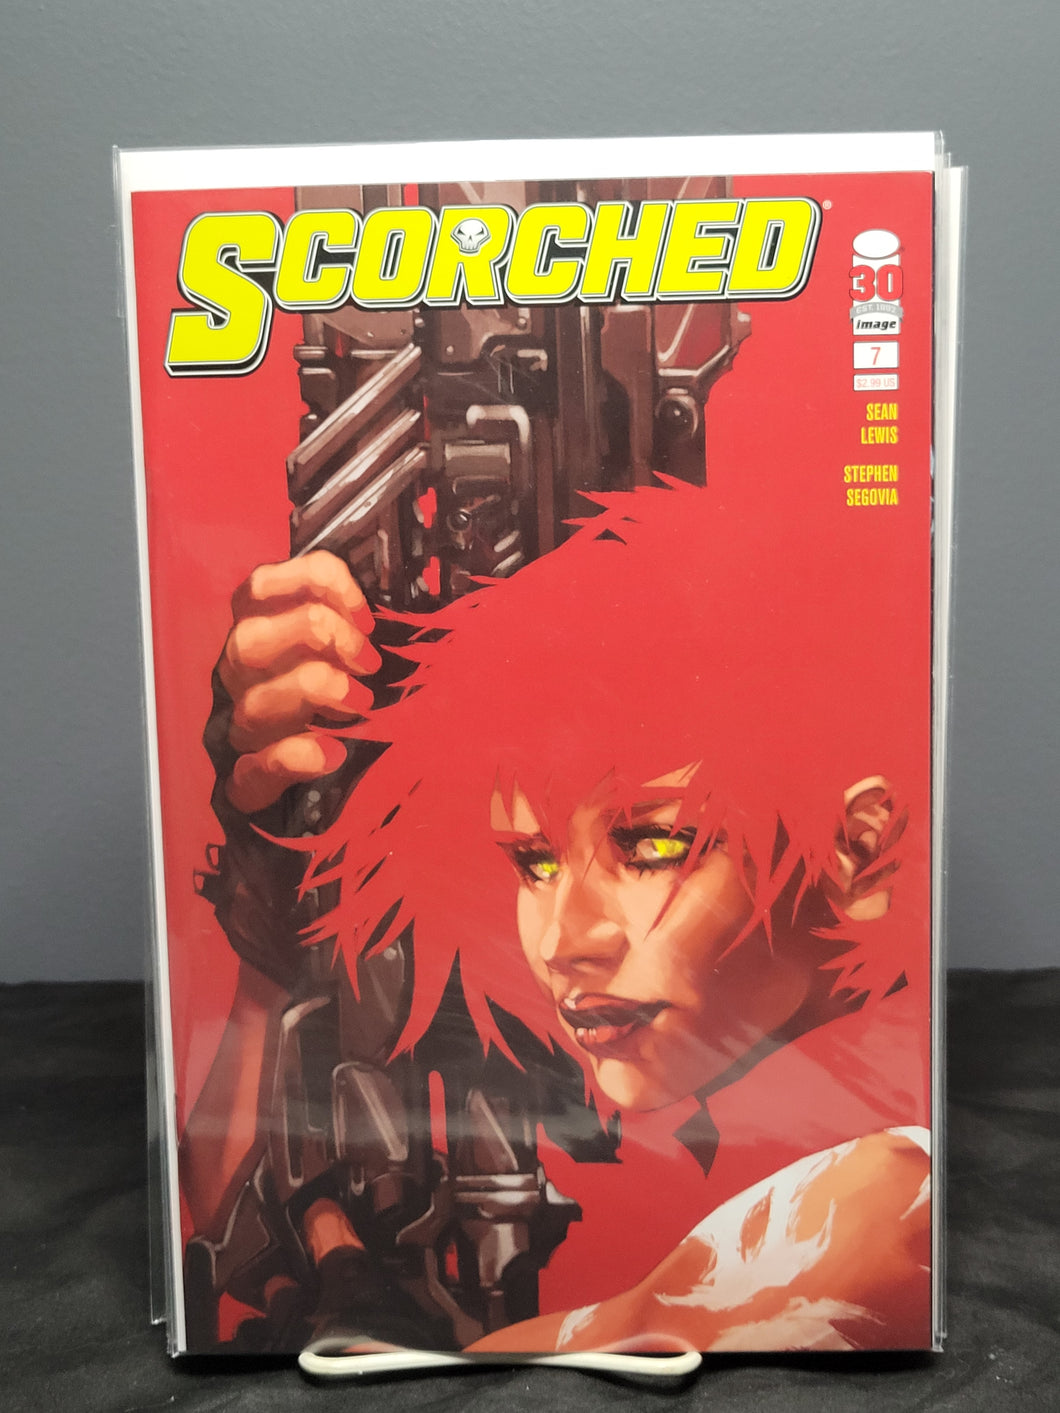 Scorched #7